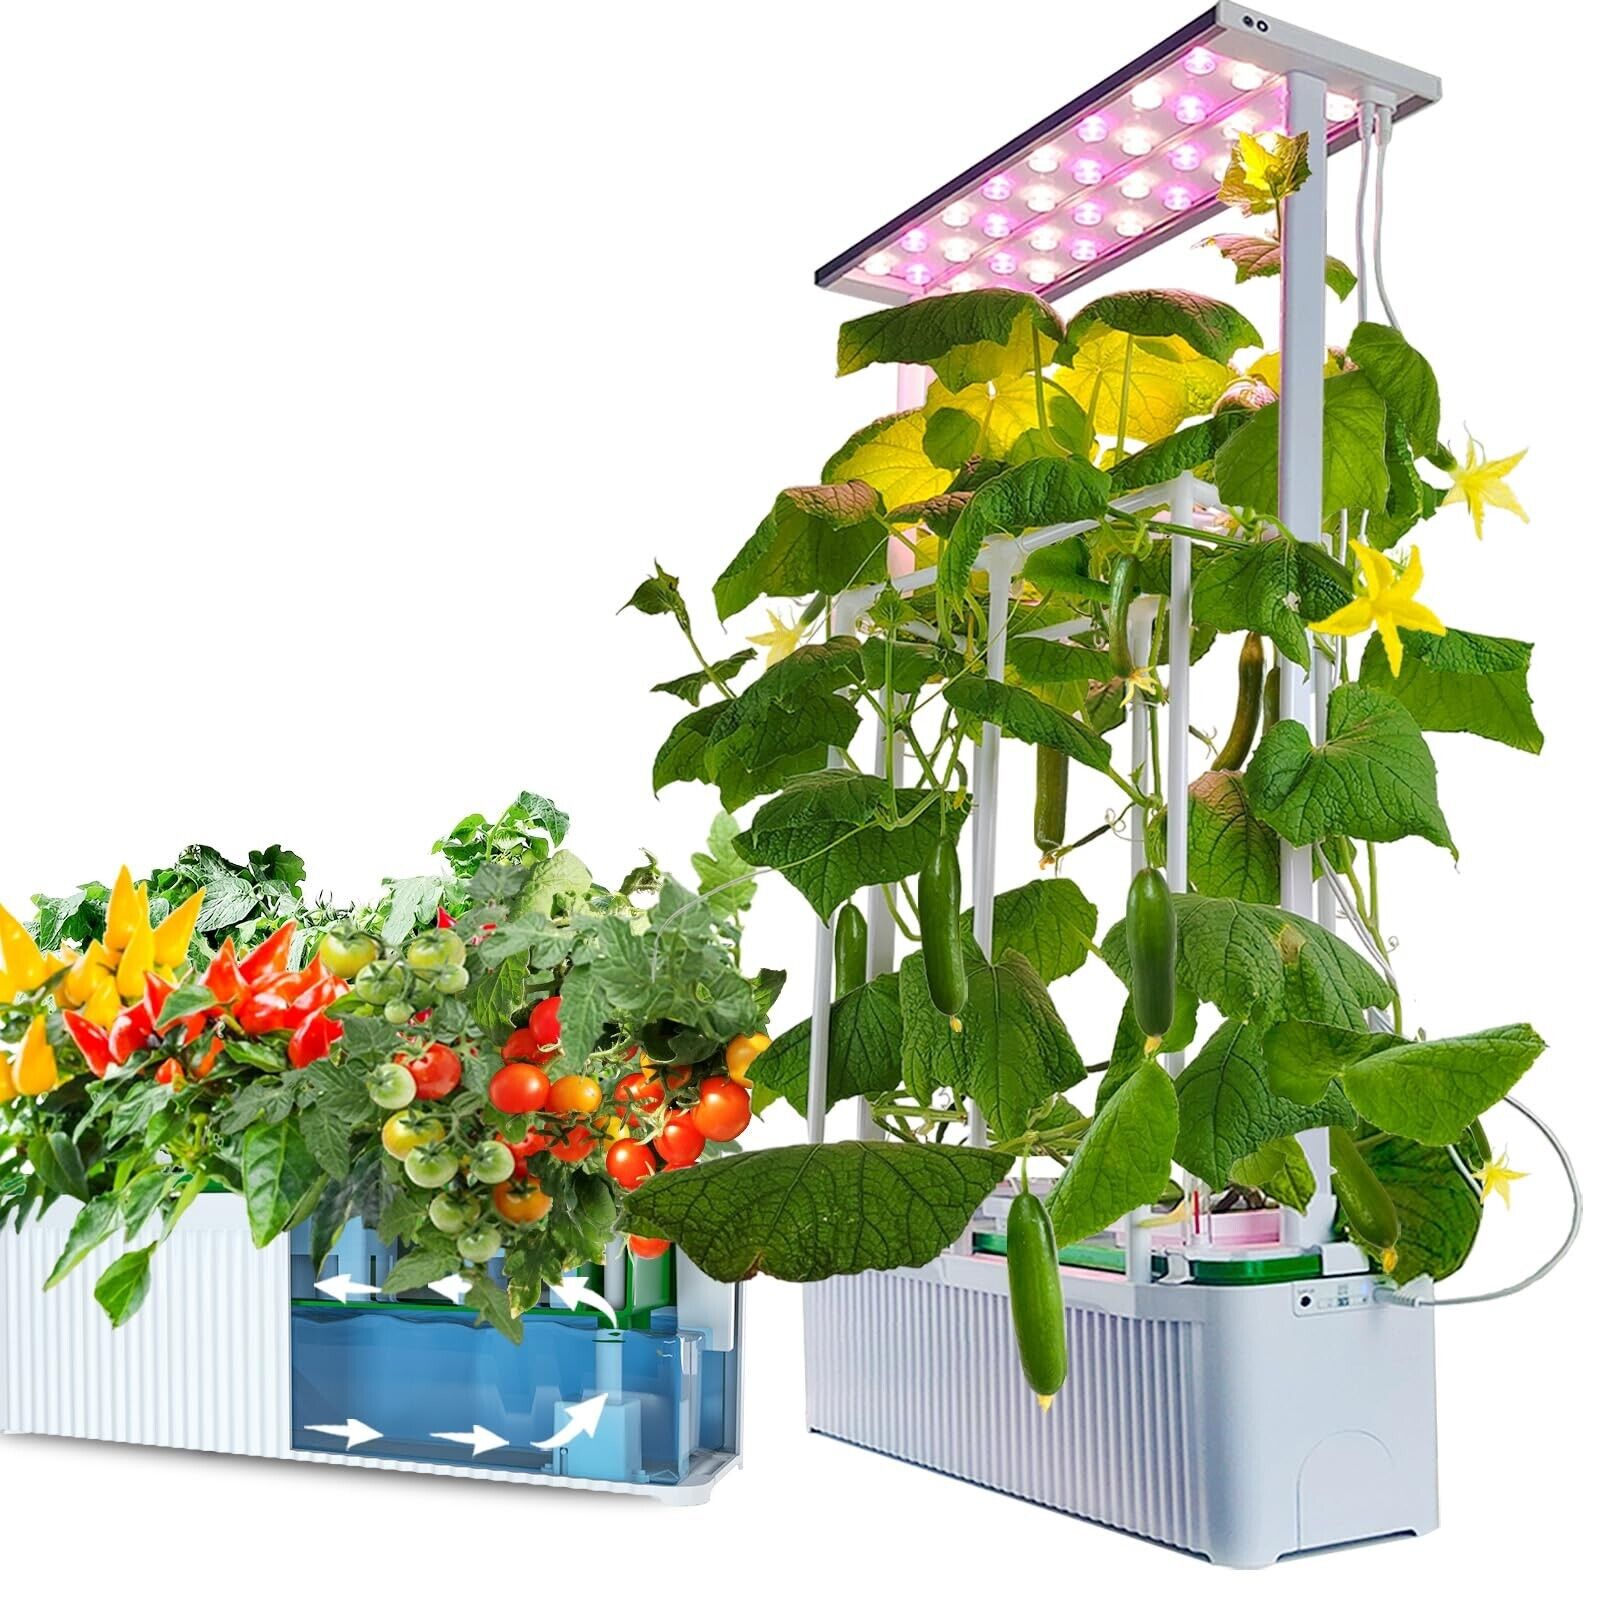 Hydroponic Growing System with Trellis,Indoor Hydroponic Garden Kit with LED ...